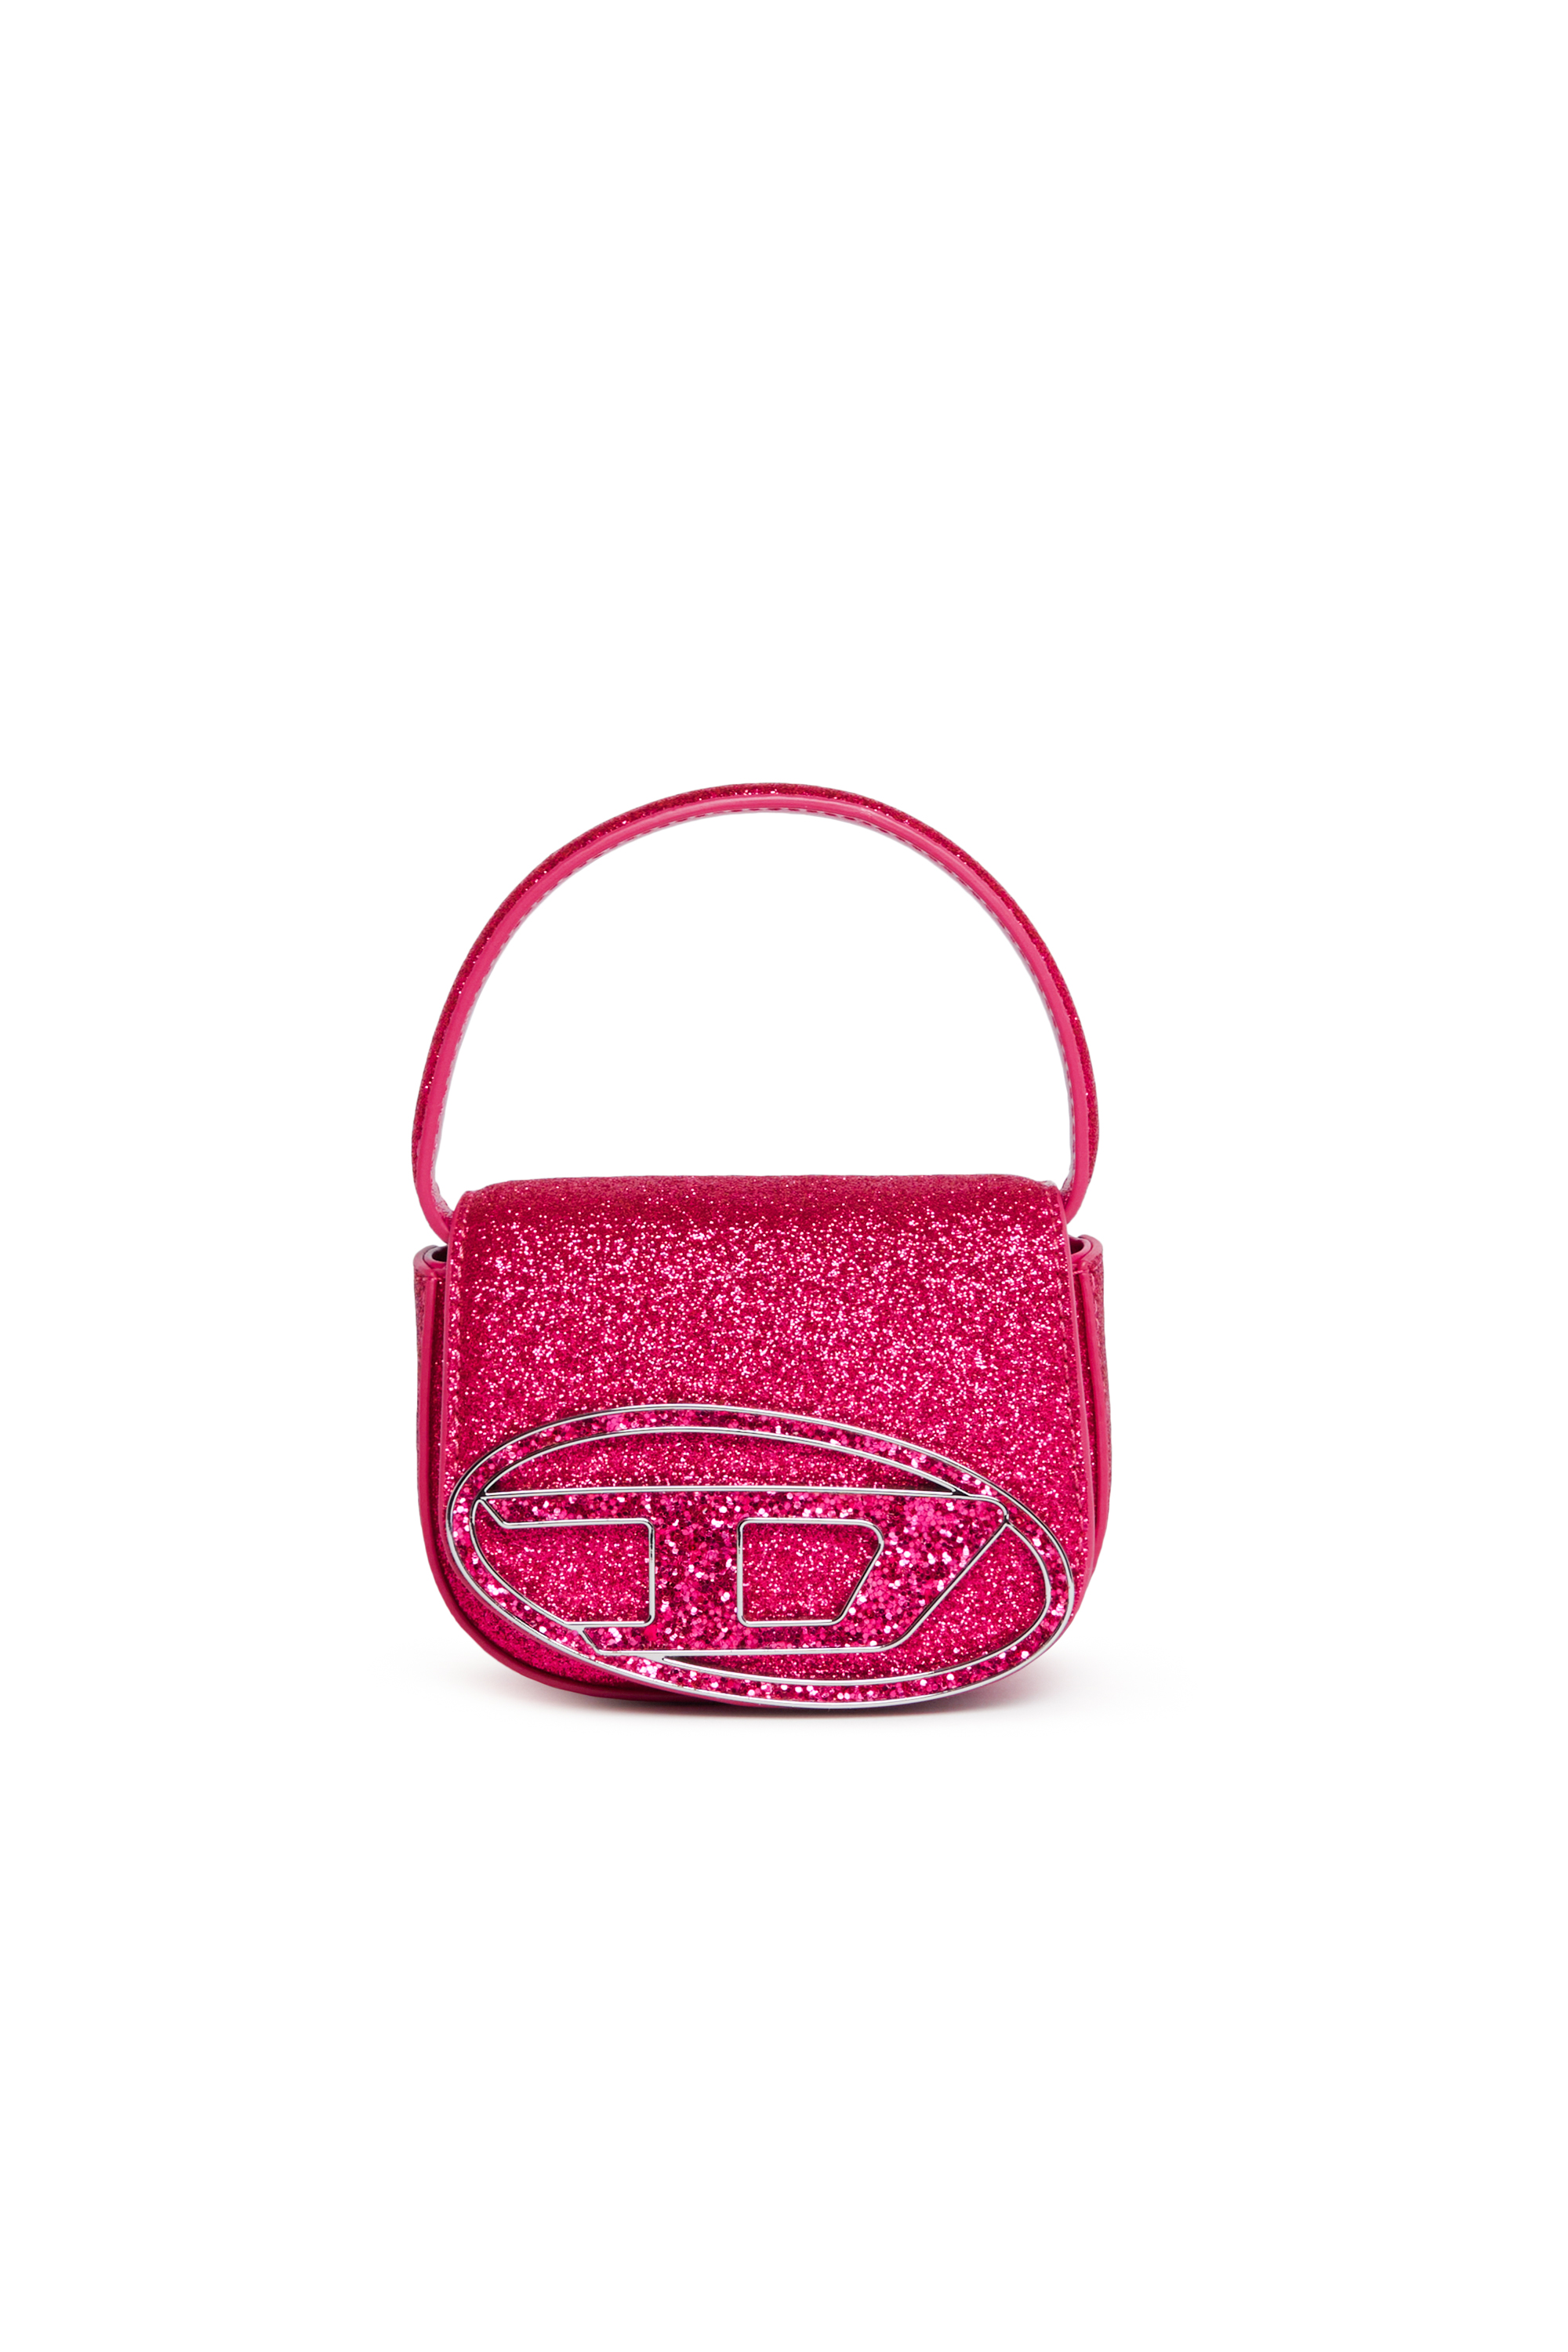 Diesel - 1DR XS, Woman Iconic mini bag in glitter fabric in Pink - Image 1